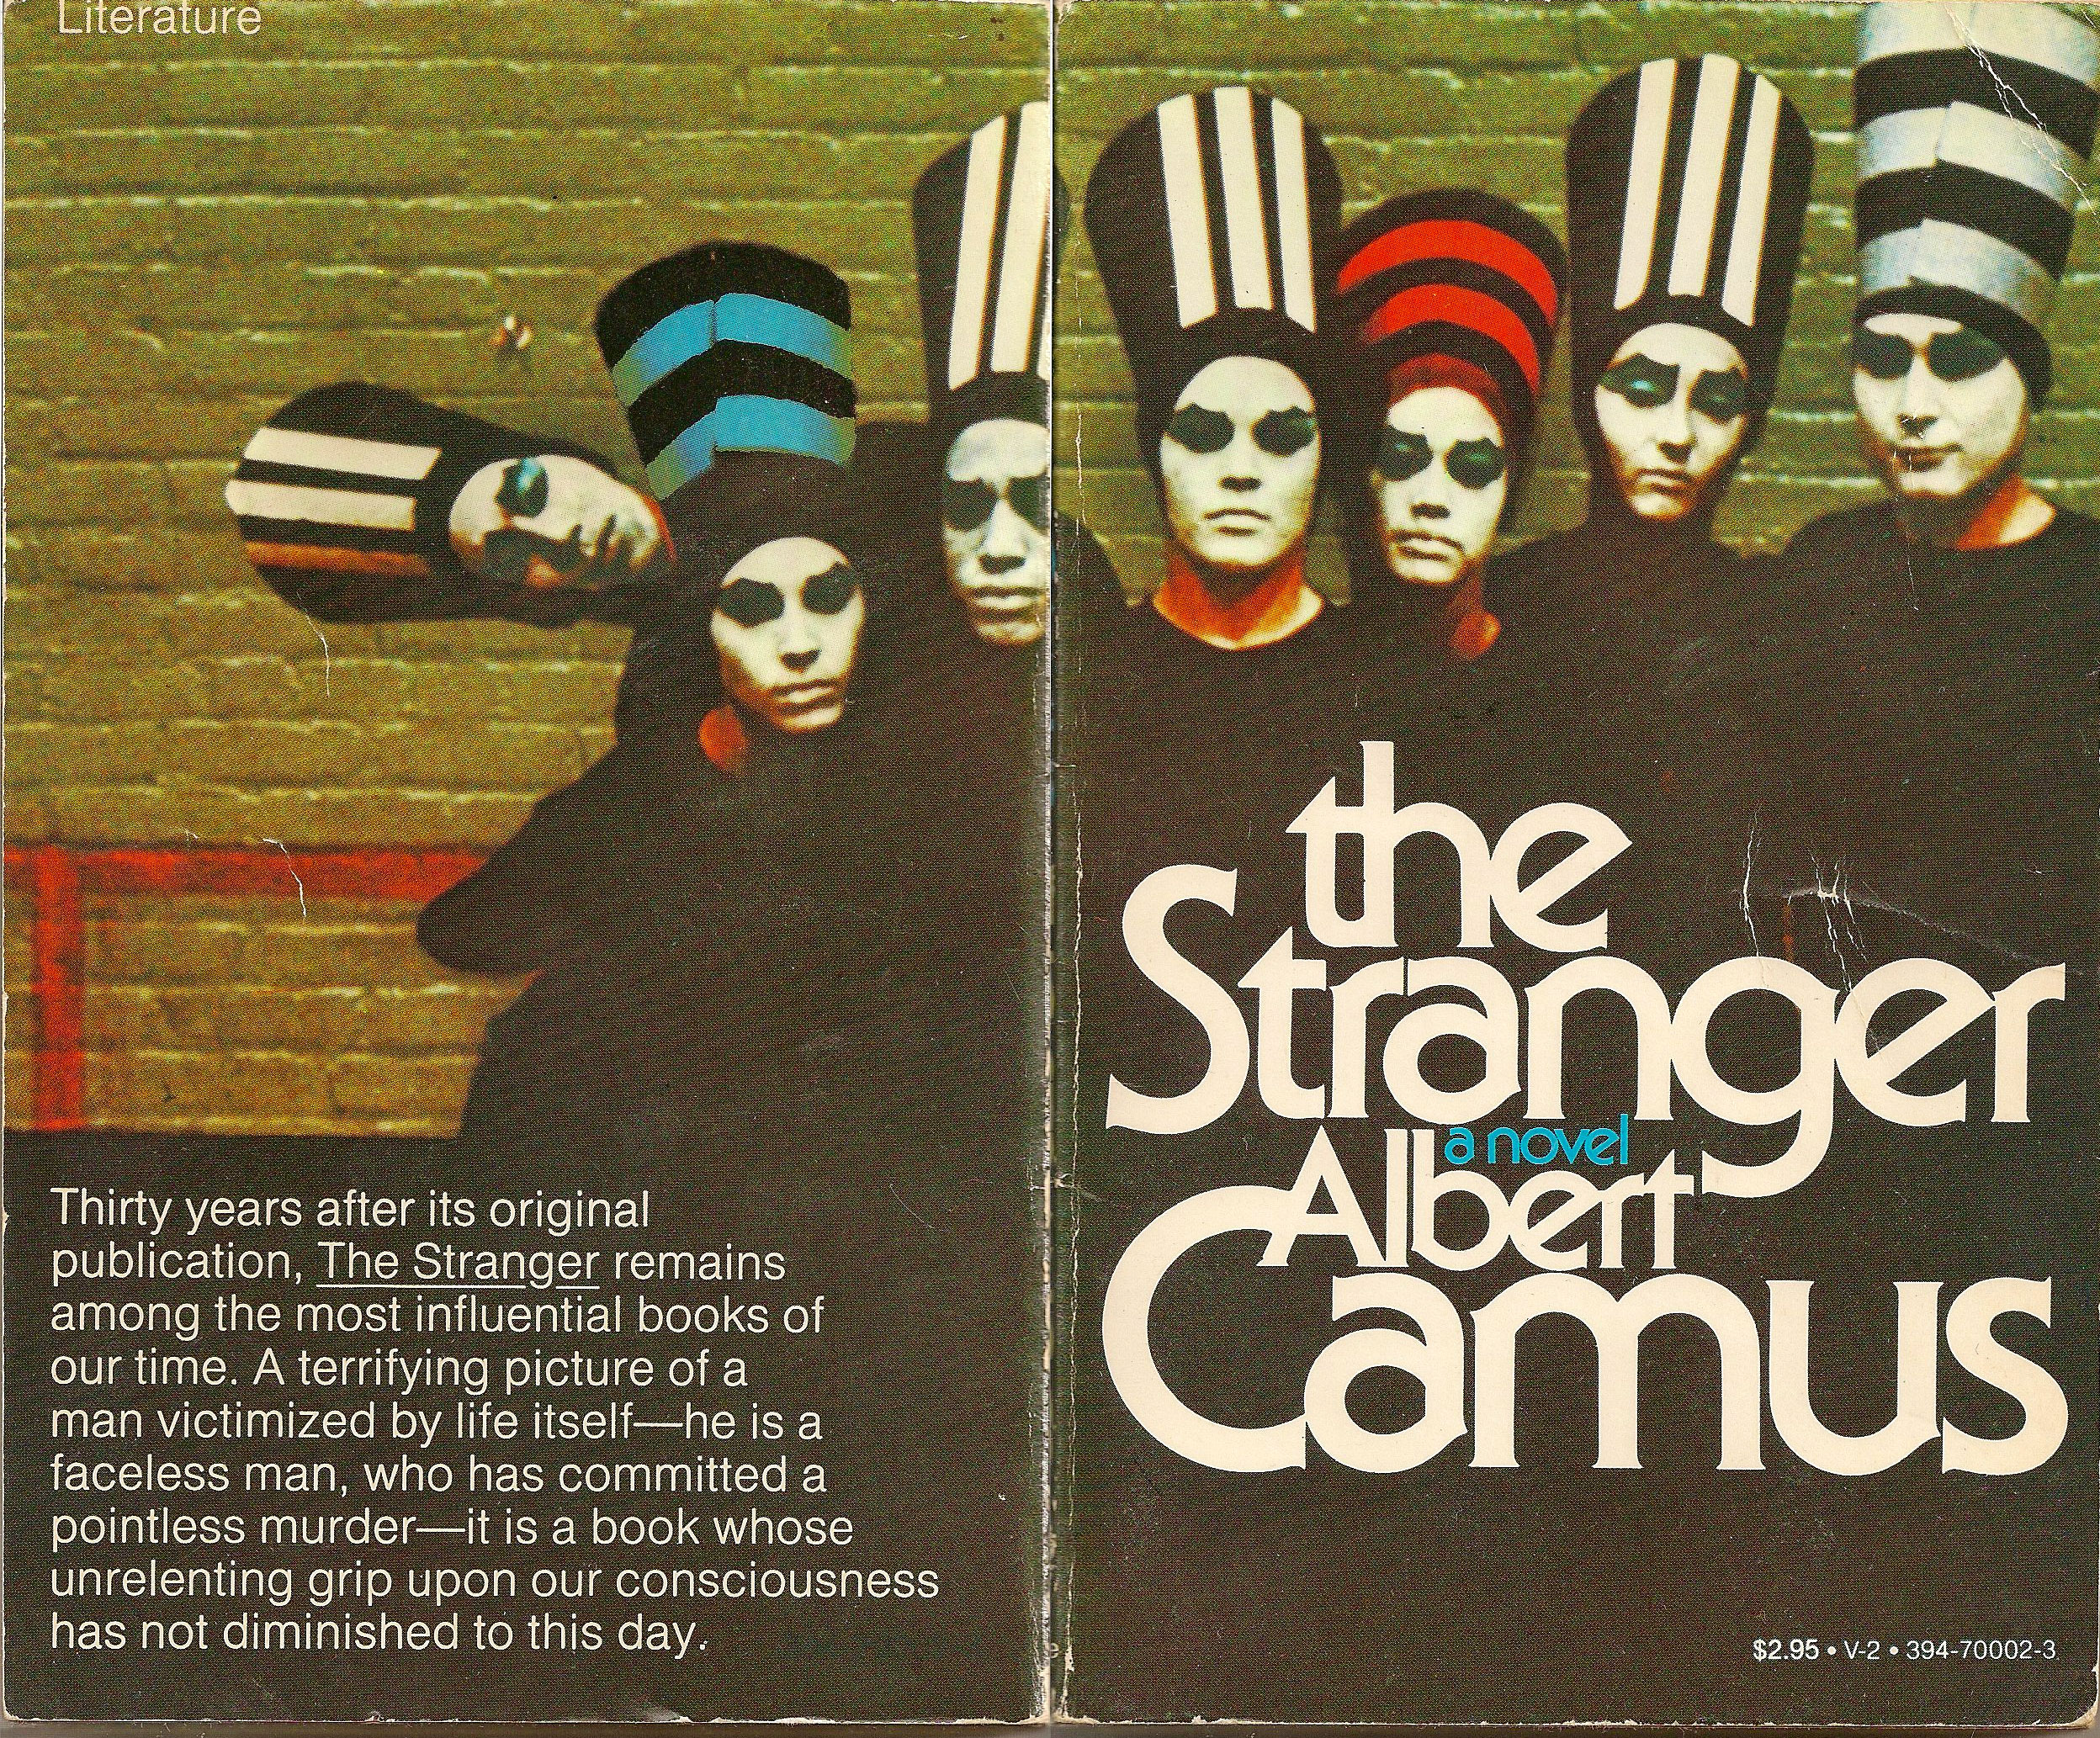 Cover to my copy of "The Stranger"